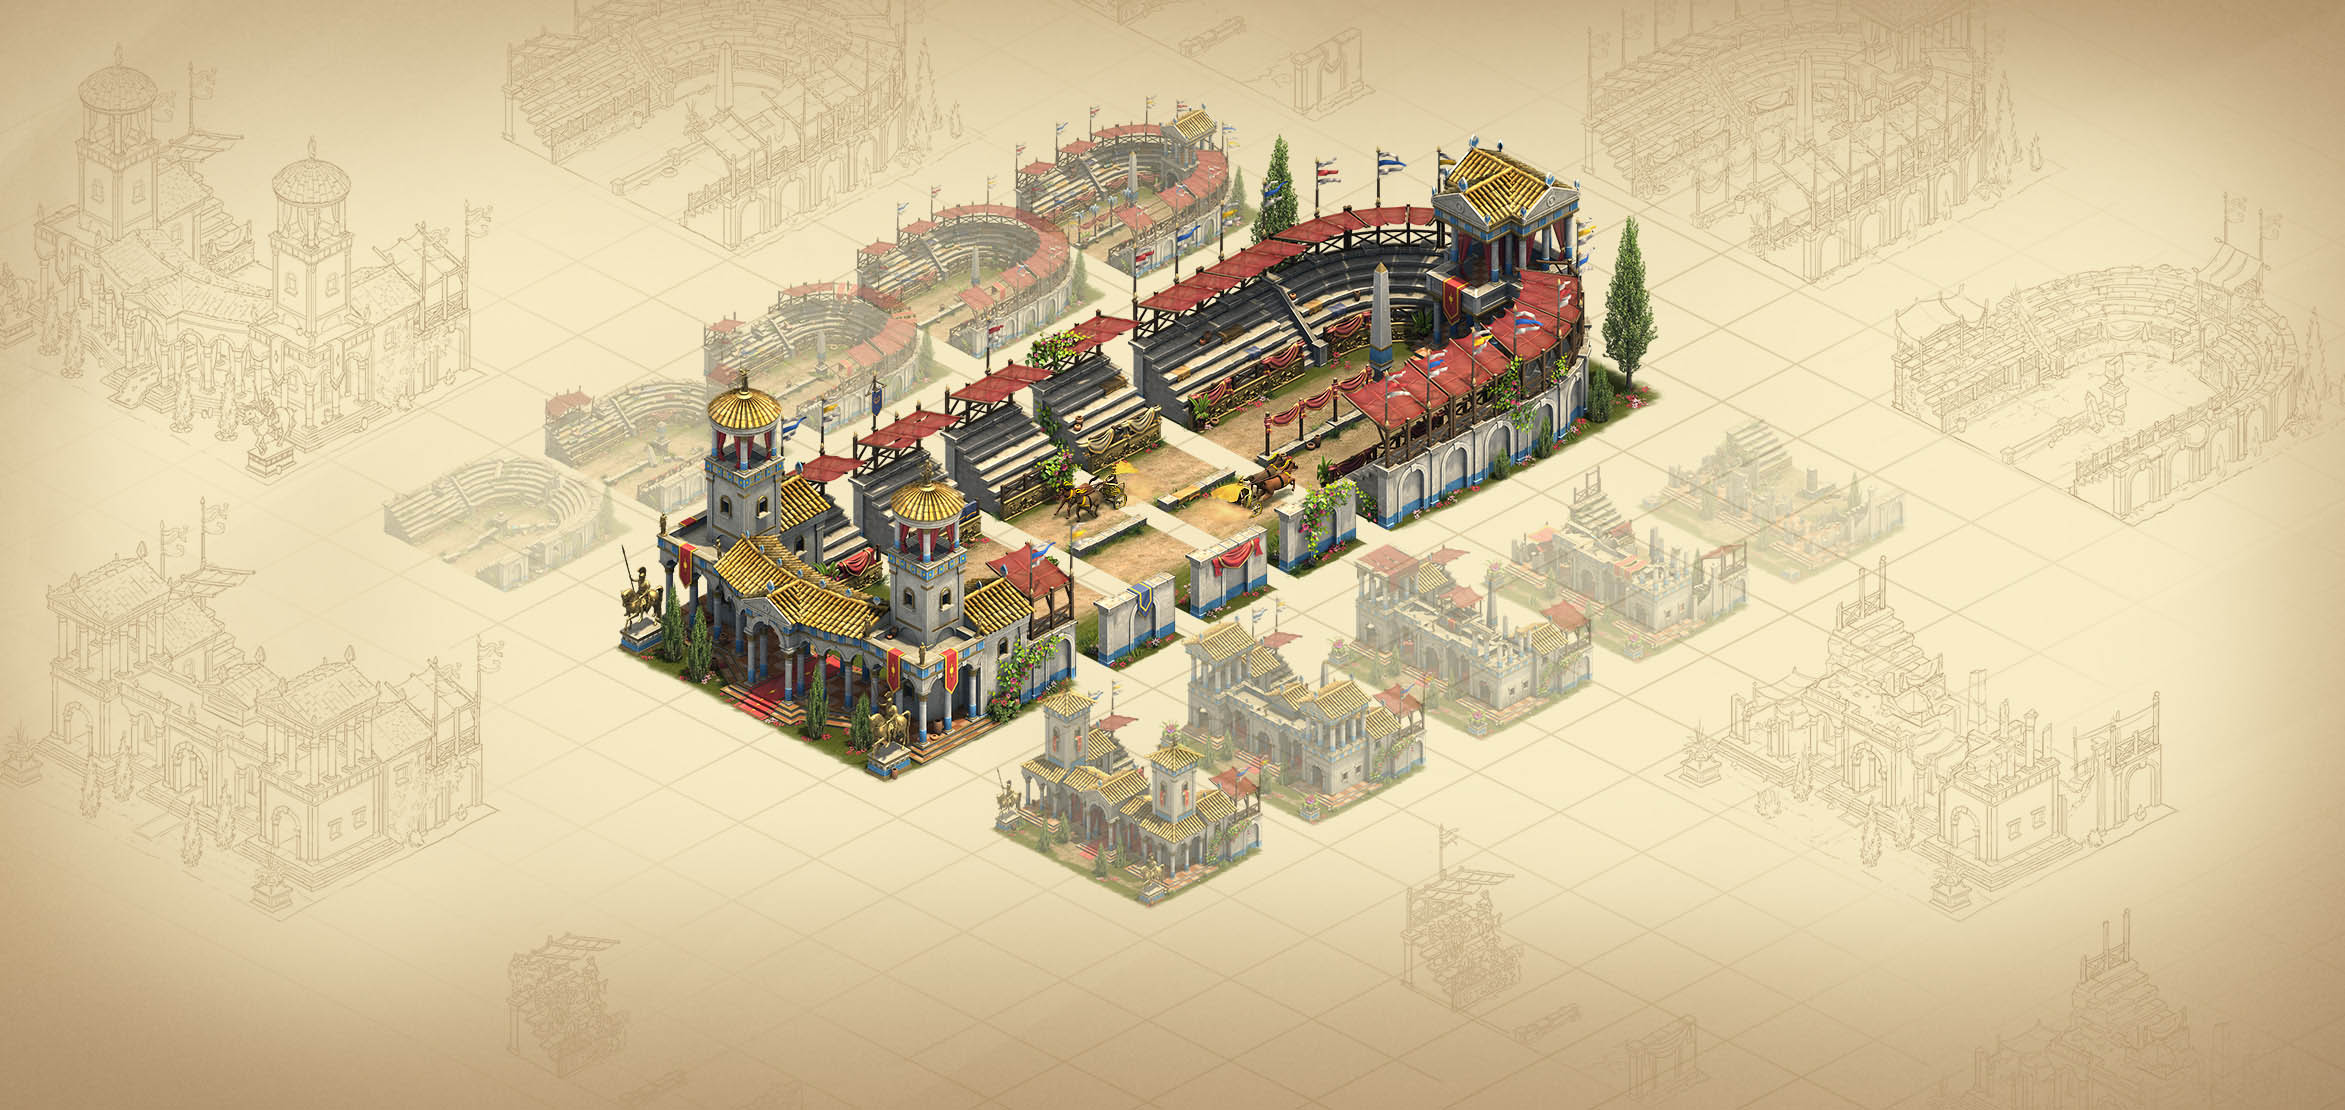 archaeology event forge of empires